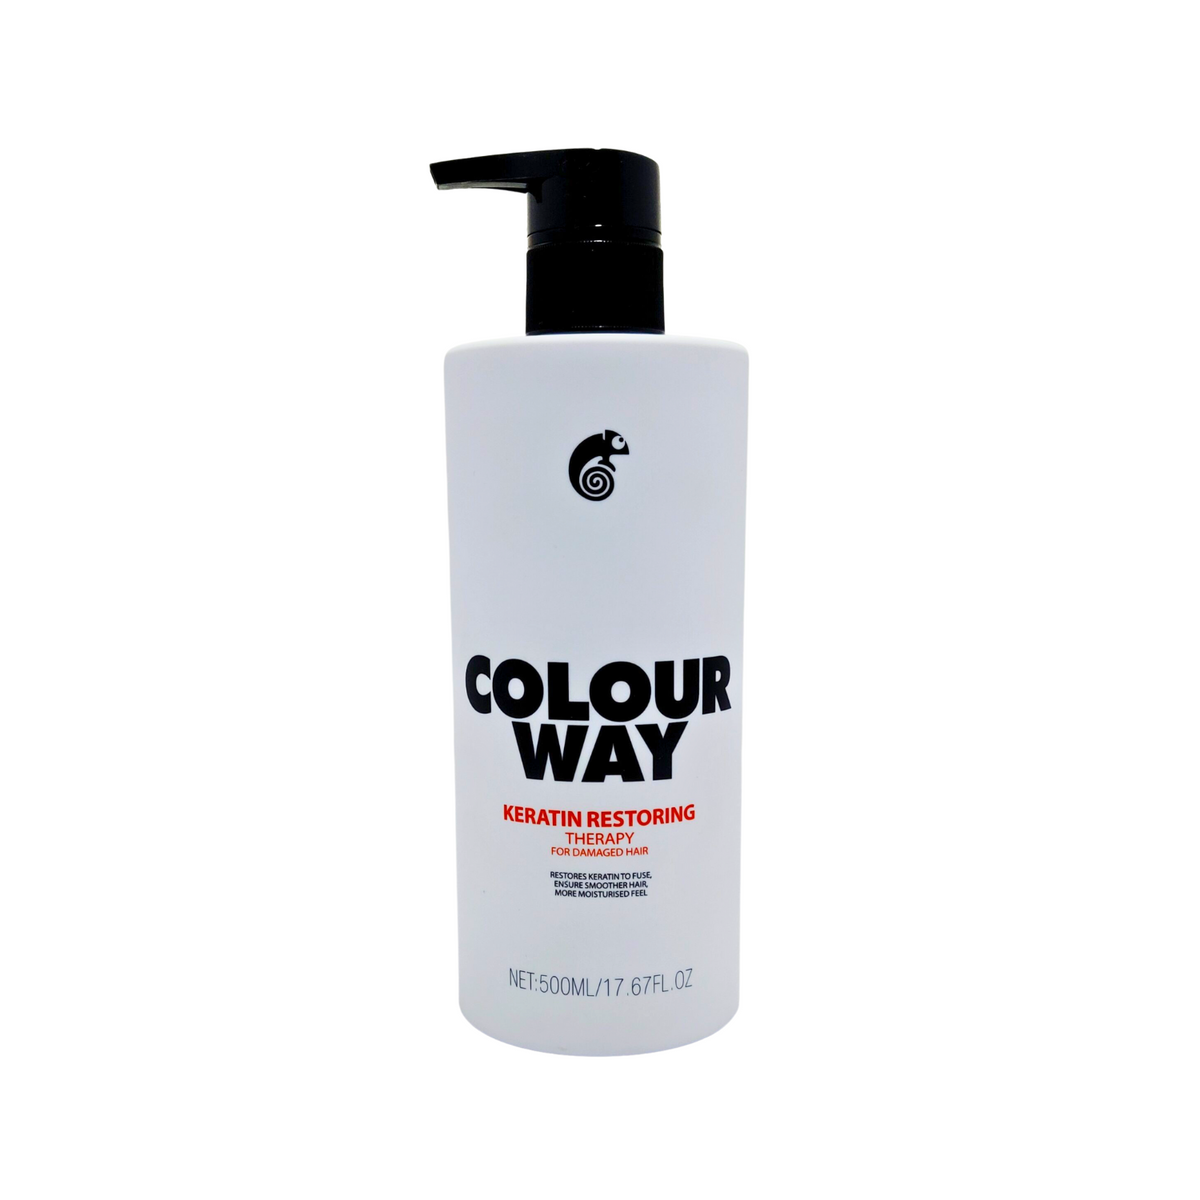 Colour Way Keratin Restoring Therapy For Damaged Hair